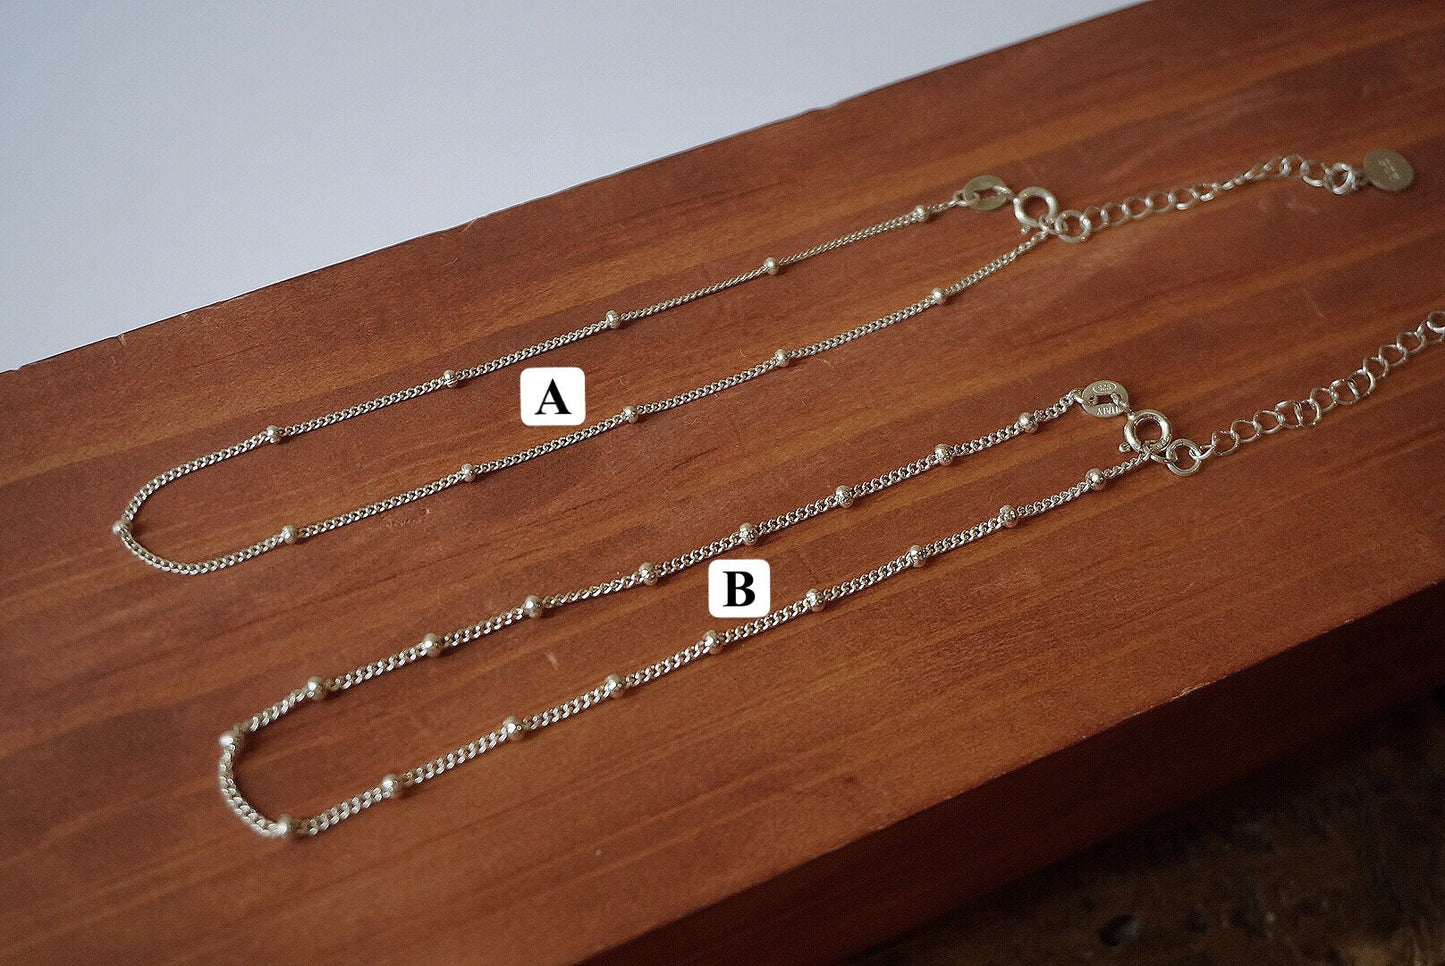 Sterling Silver Satellite Chain Anklet/silver beaded chain anklet/Delicate anklet/Minimalist Jewelry/Layering anklet/tiny anklet/Gift